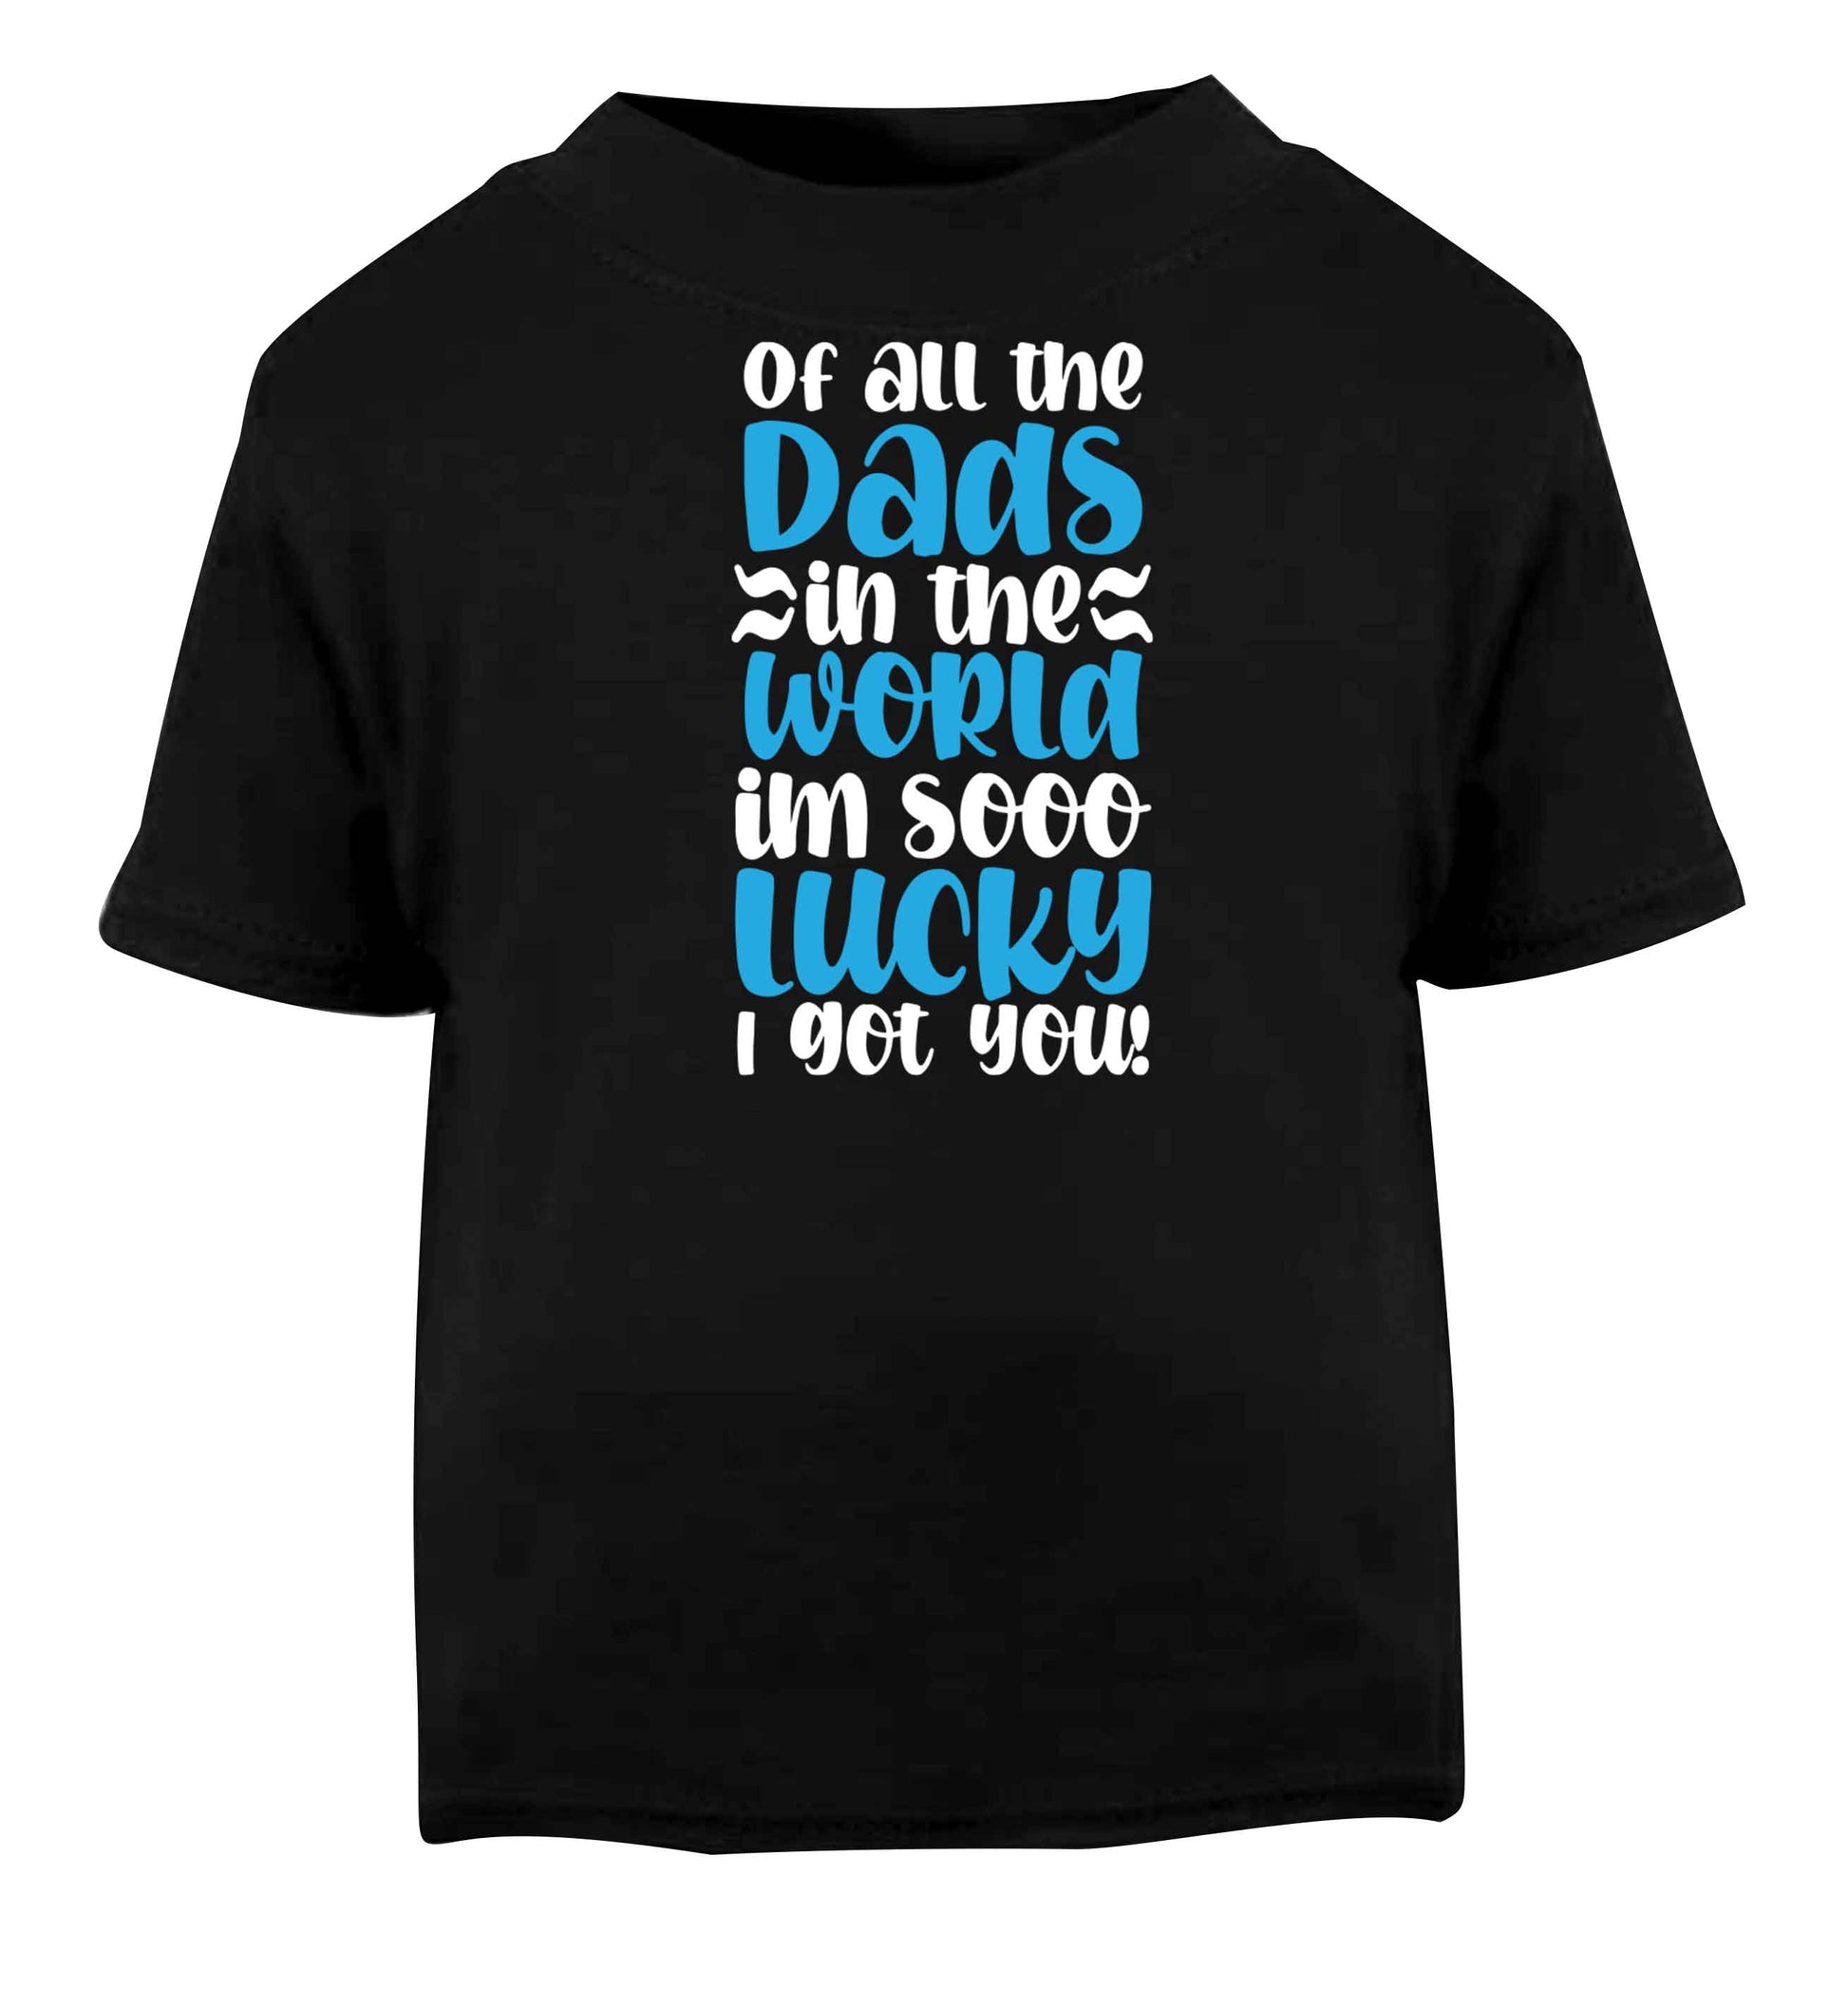 Of all the Dads in the world I'm so lucky I got you Black baby toddler Tshirt 2 years